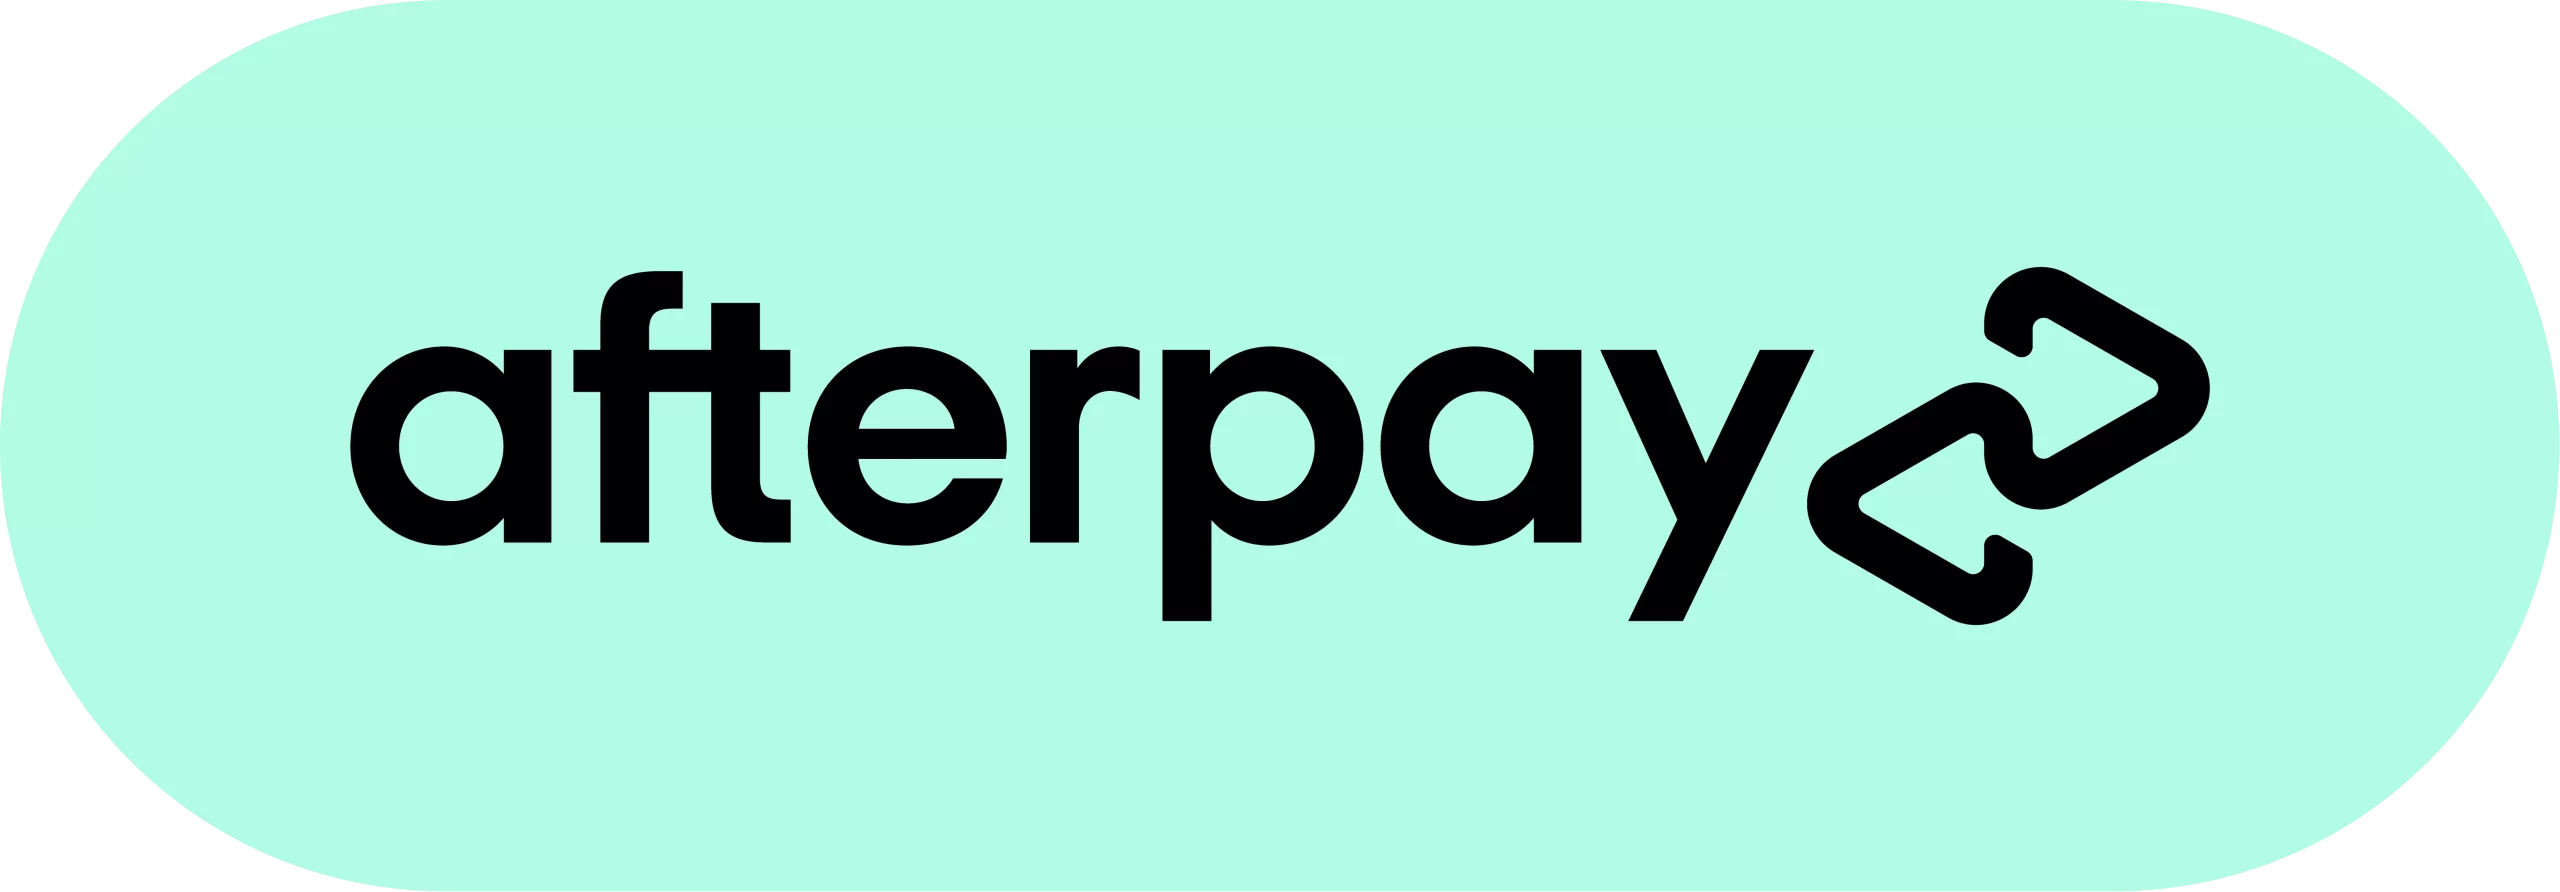 Afterpay logo buy now pay later